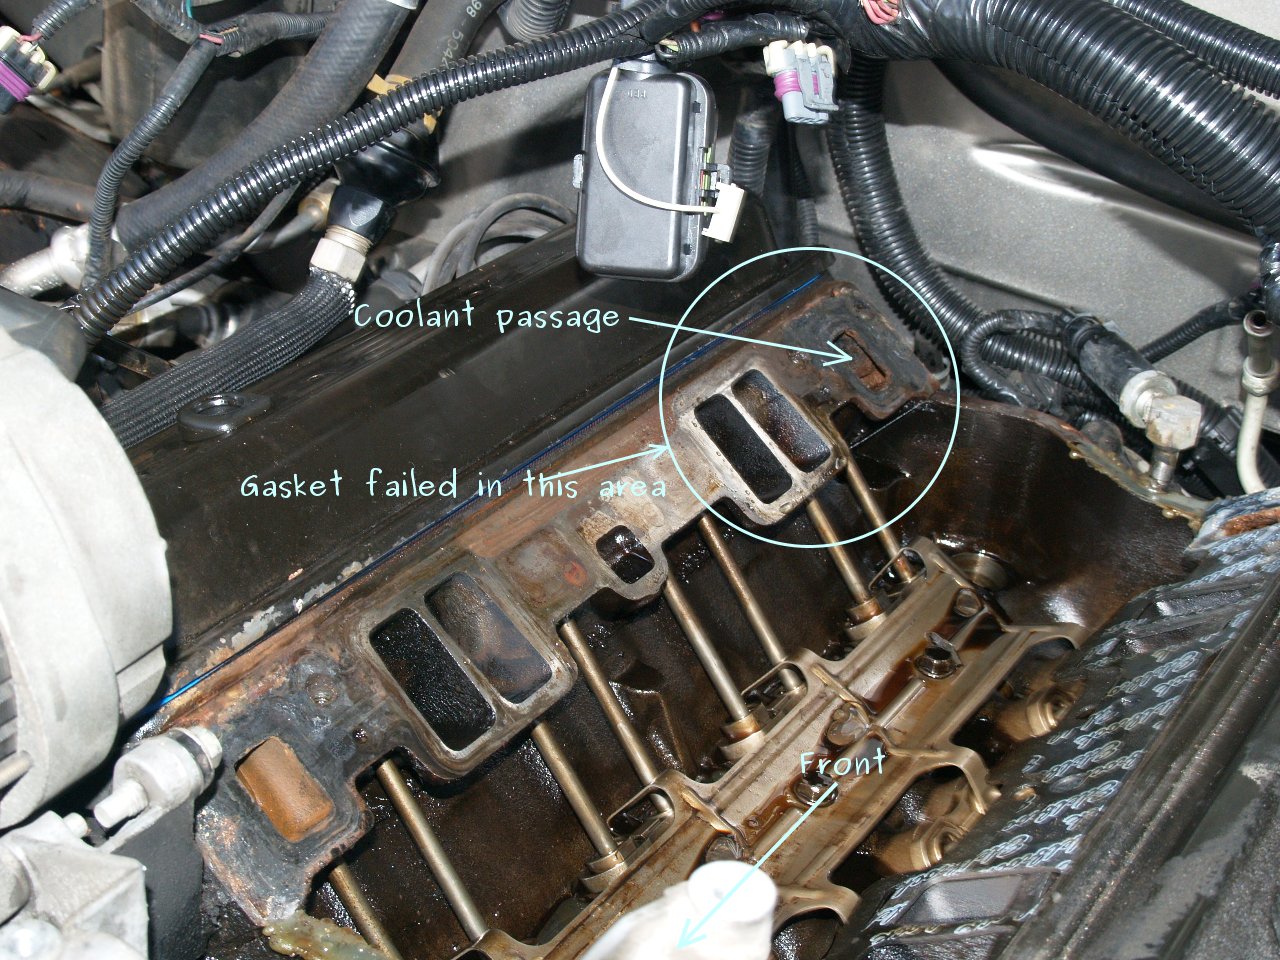 See B3104 in engine